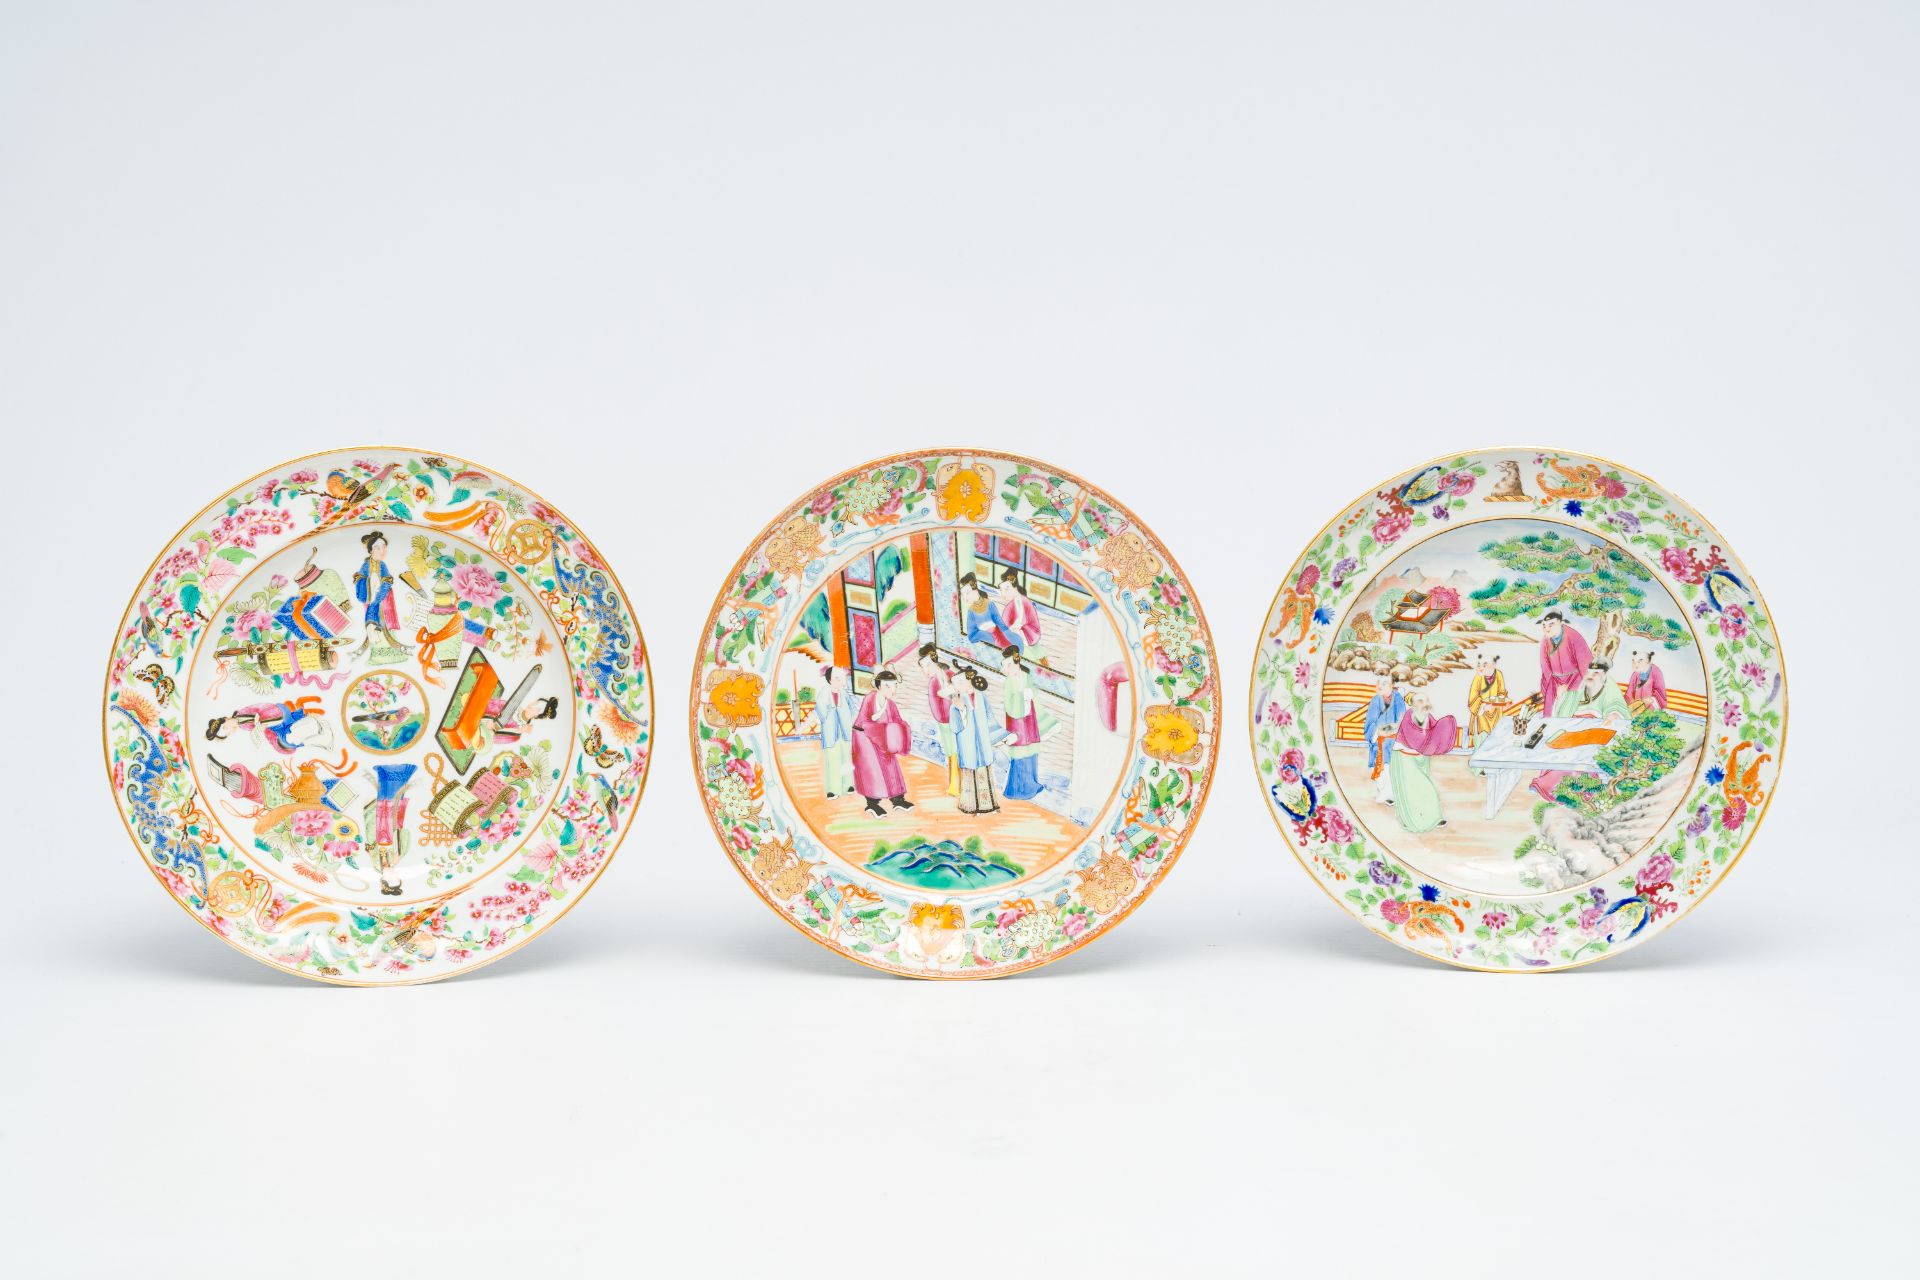 Five Chinese Canton famille rose plates with palace scenes and figurative design, 19th C. - Image 2 of 5